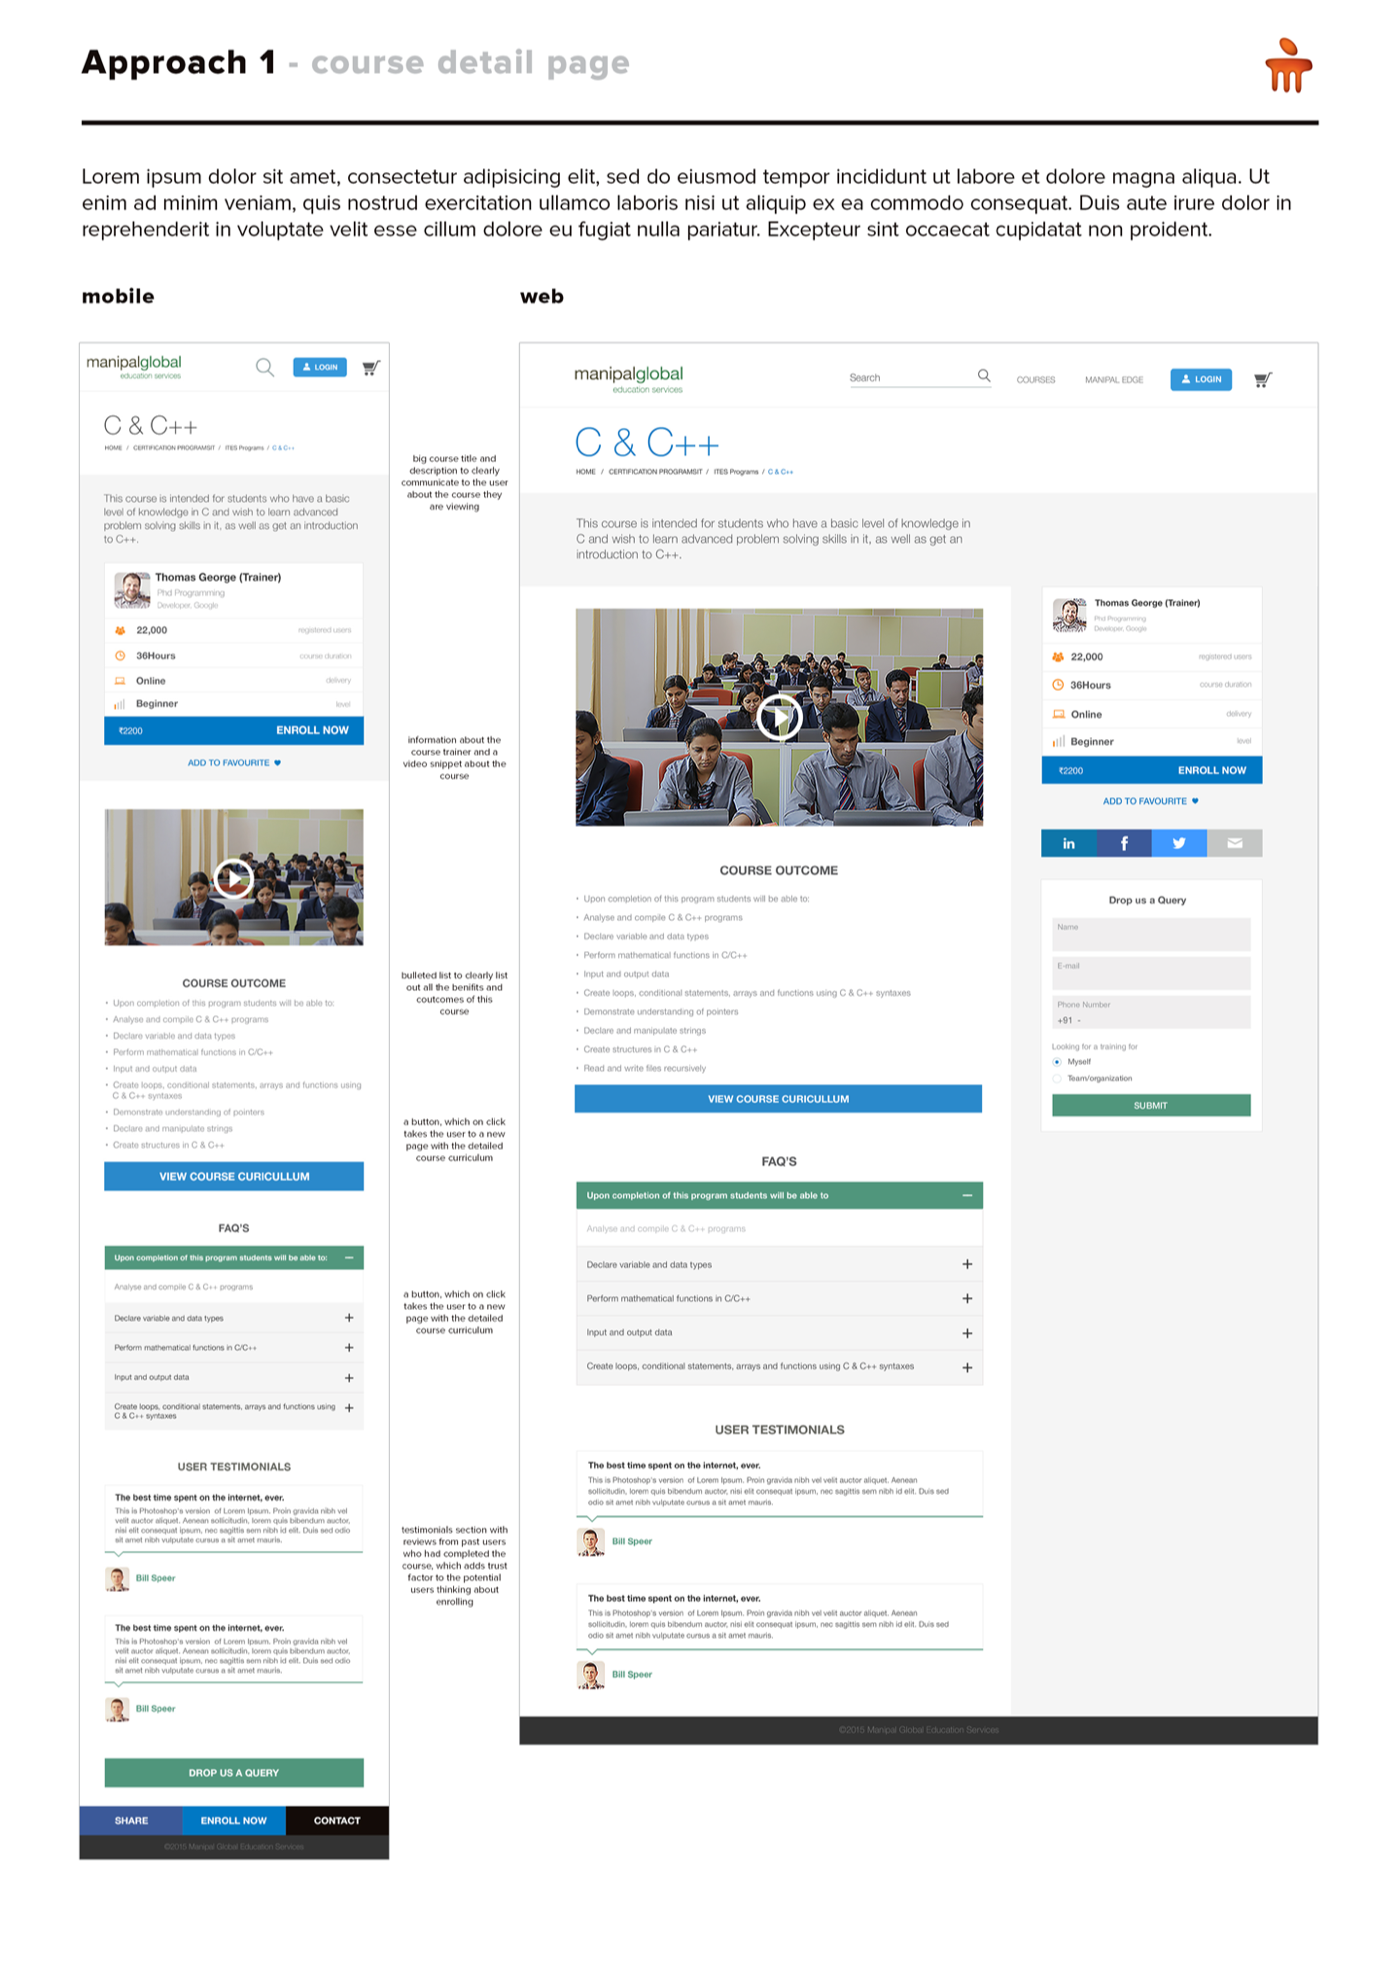 manipal University redesign Website design UI ux research bangalore India Education portal online learning